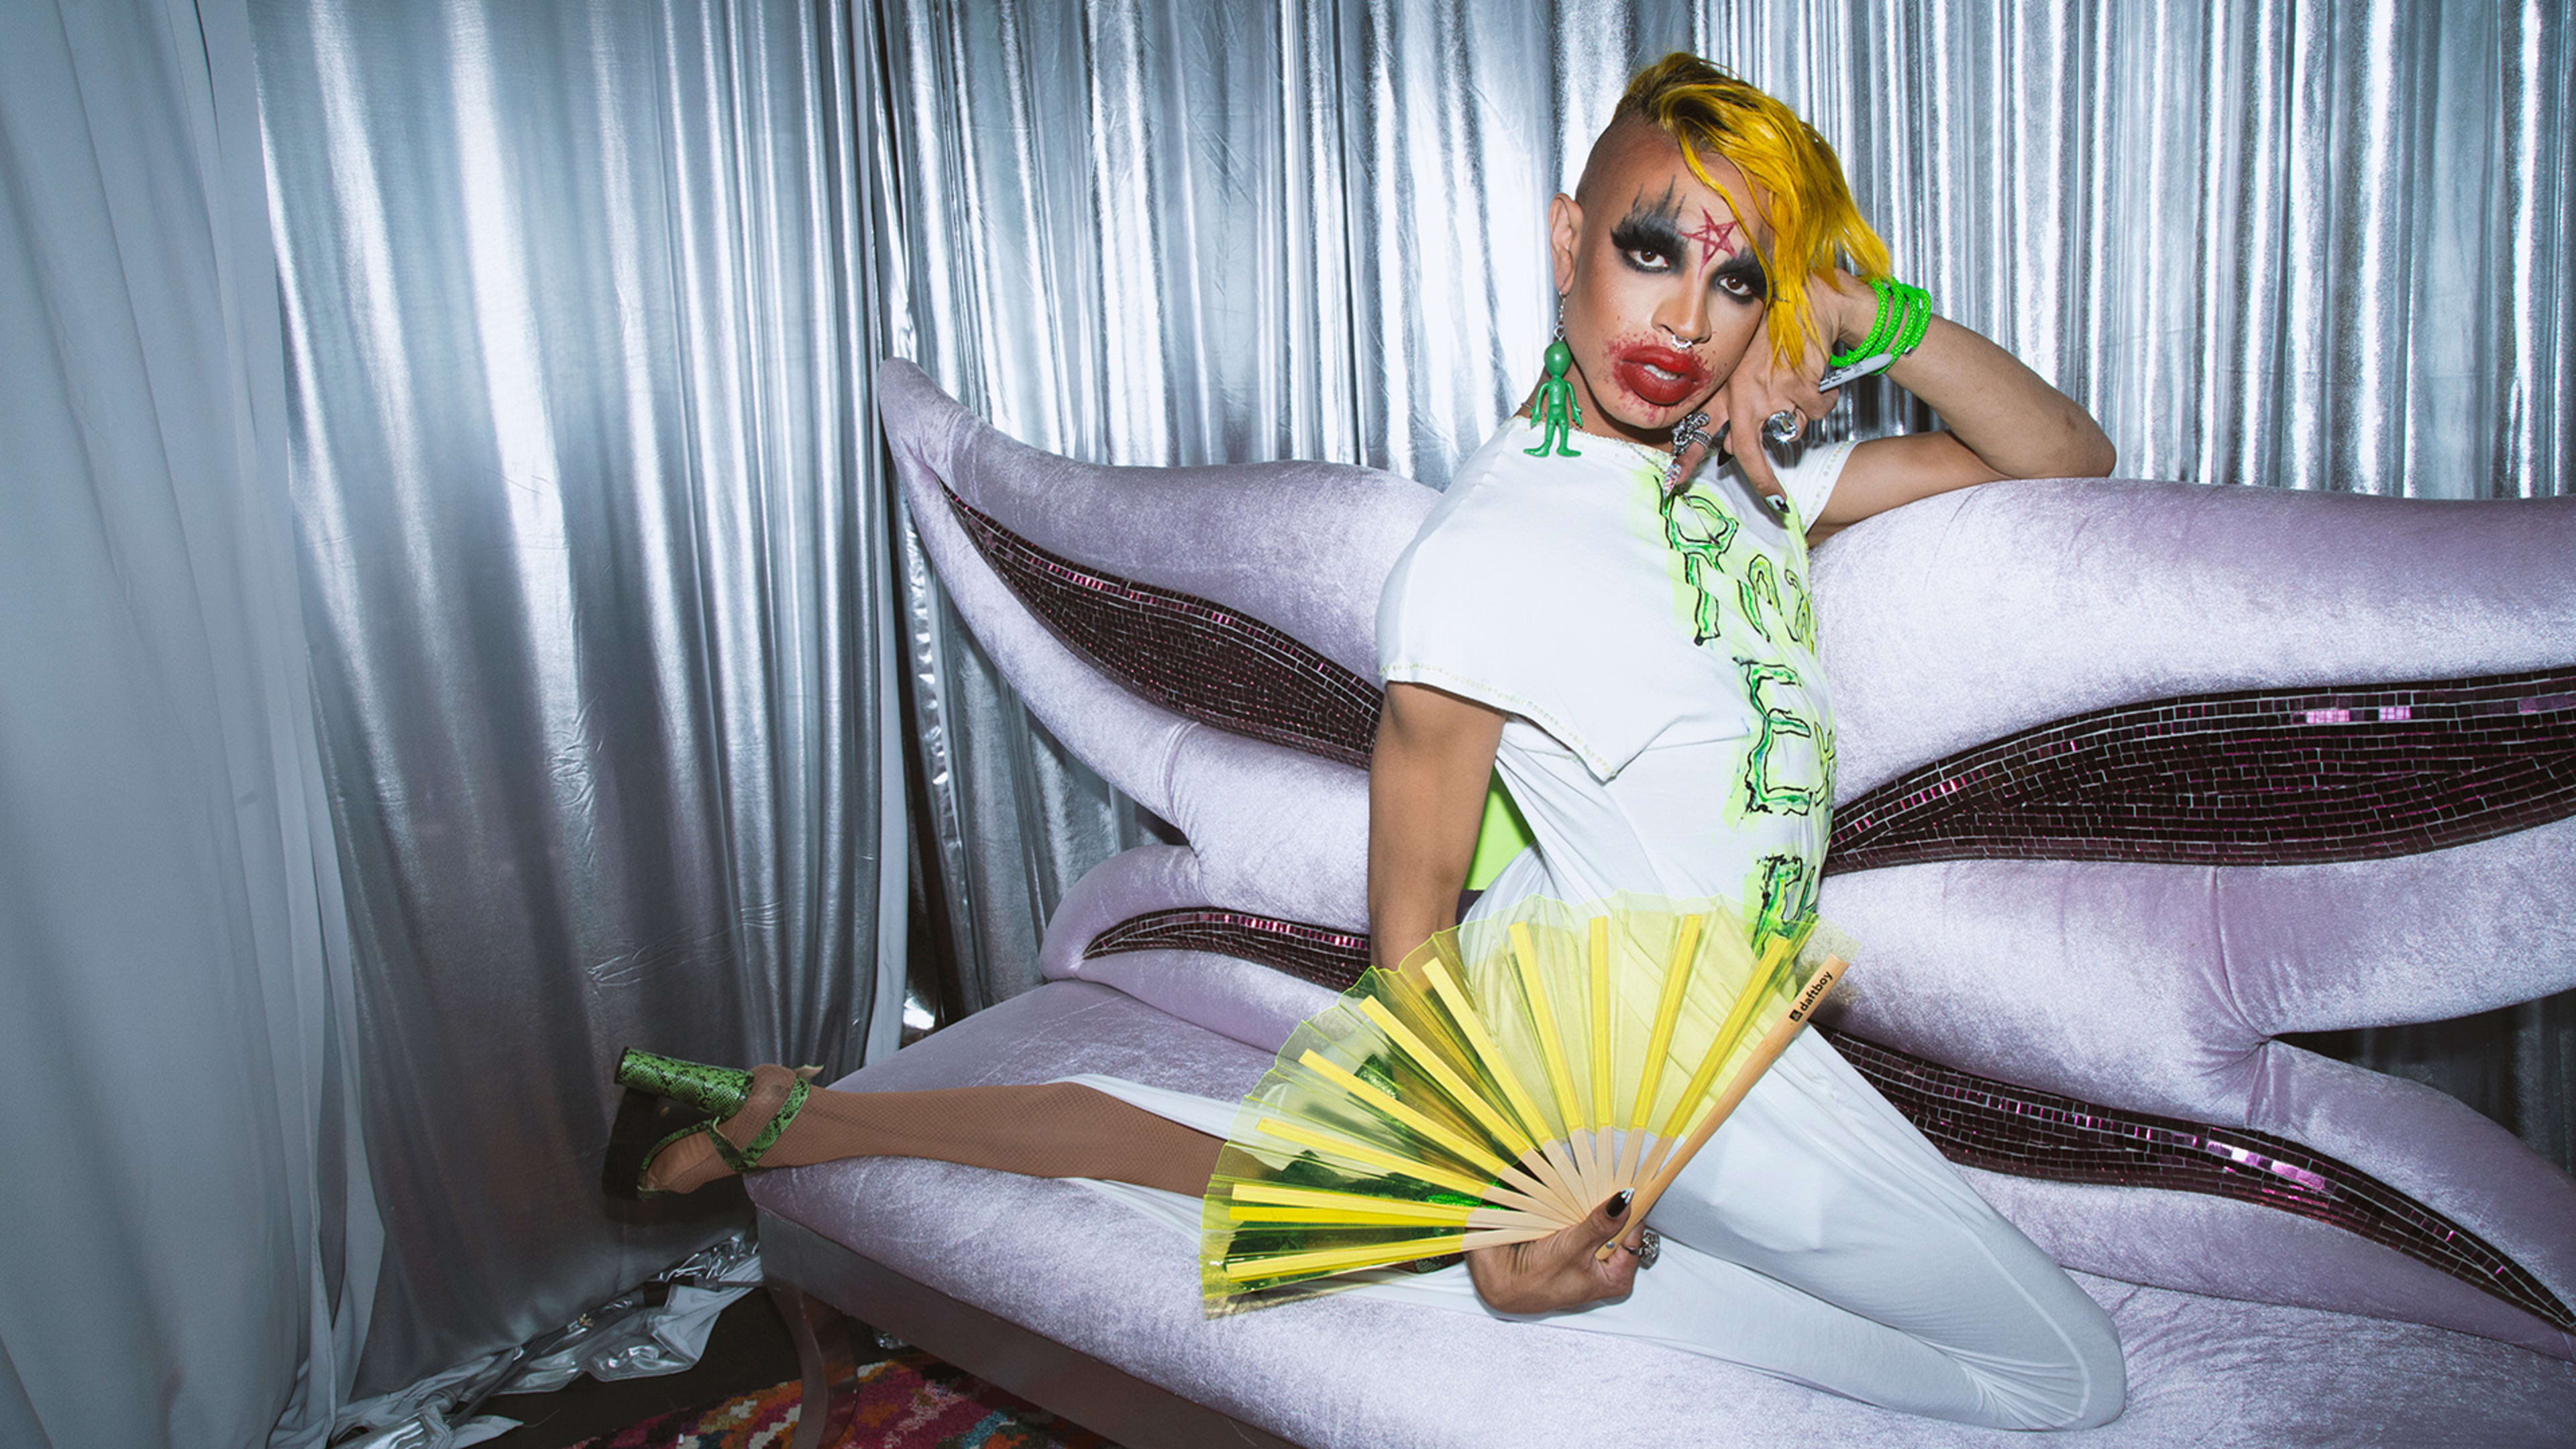 Why ‘RuPaul’s Drag Race’ winner Yvie Oddly has to think of ‘creative ways to make drag interesting’